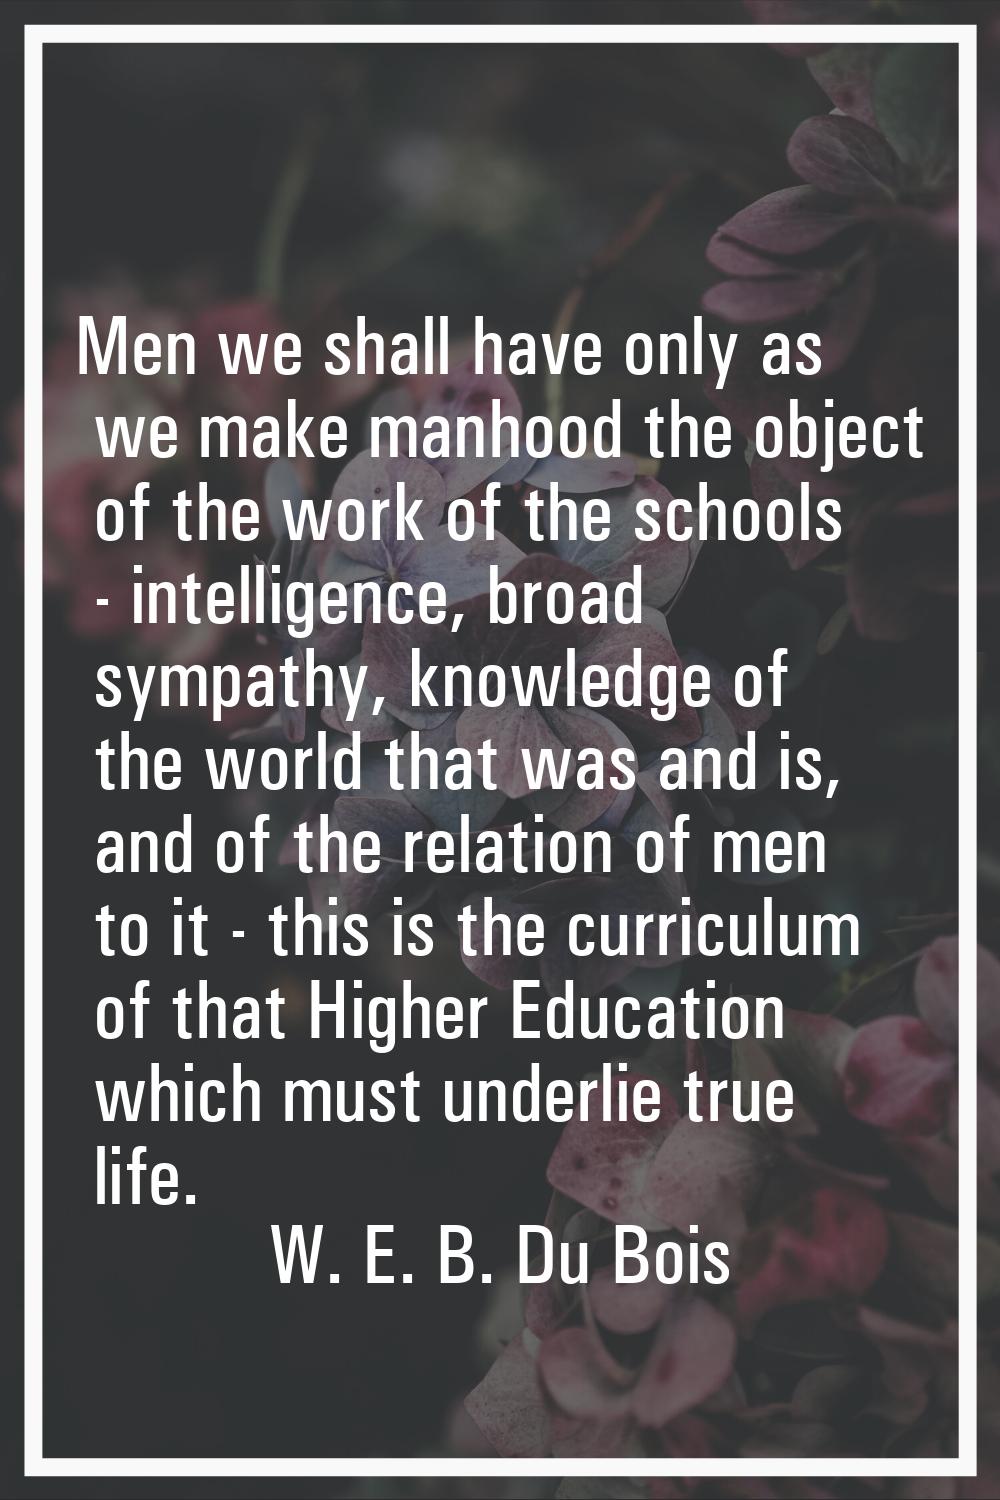 Men we shall have only as we make manhood the object of the work of the schools - intelligence, bro